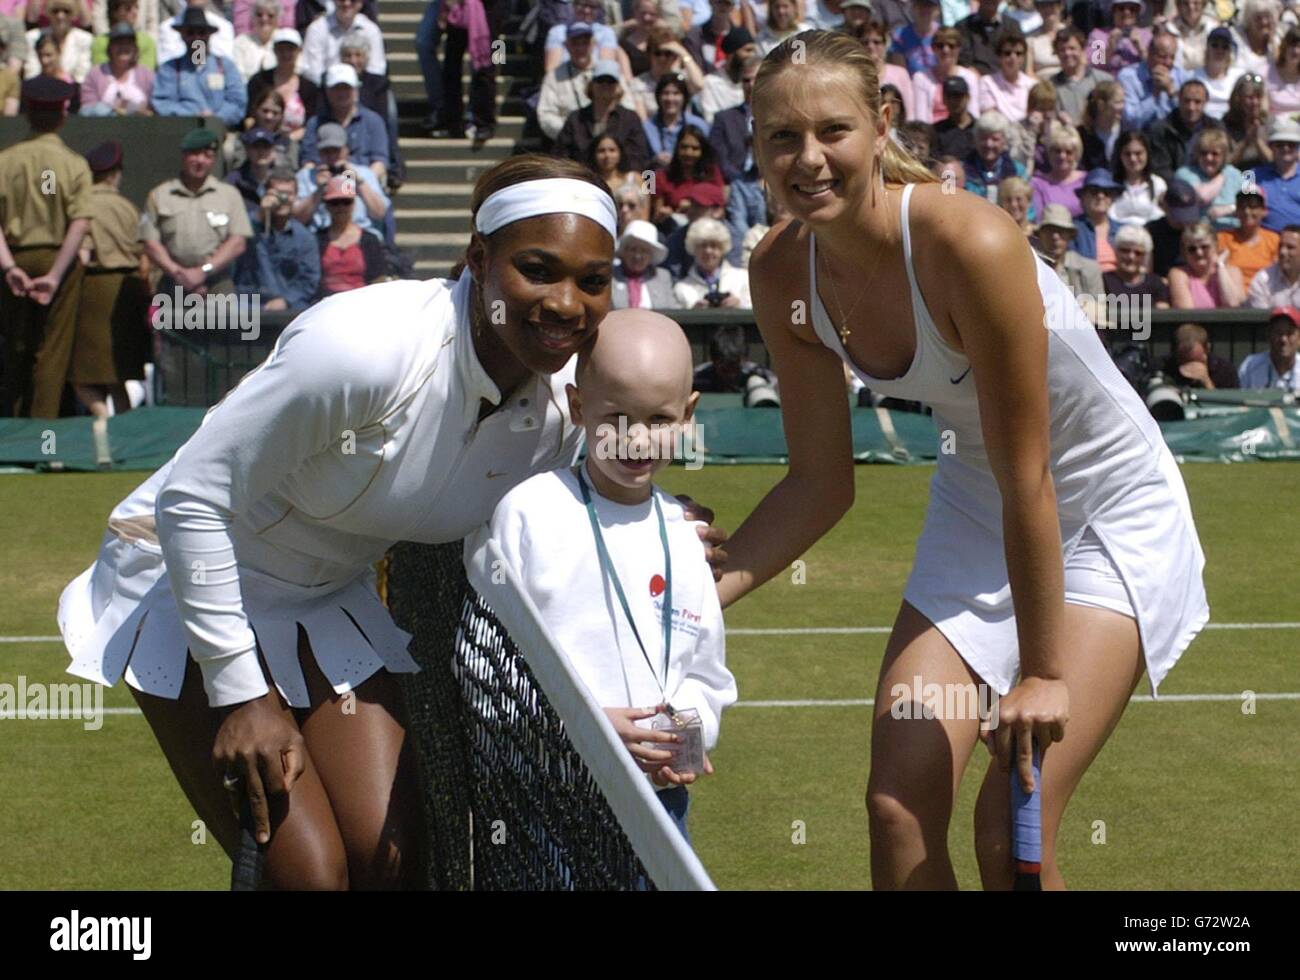 Five year old Emily Bailes from Walsall in the West Midlands who performed the coin toss to decide who would serve first between Serena Williams (left) and Maria Sharapova in the final of the Ladies' Singles tournament at The Lawn Tennis Championships at Wimbledon, London. Emily was representing the Birmingham Children's Hospital Charity which raises money to purchase equipment for the hospital. She was assisted by the tournament referee Alan Mills and the match umpire Alison Lang. , NO MOBILE PHONE USE. Stock Photo